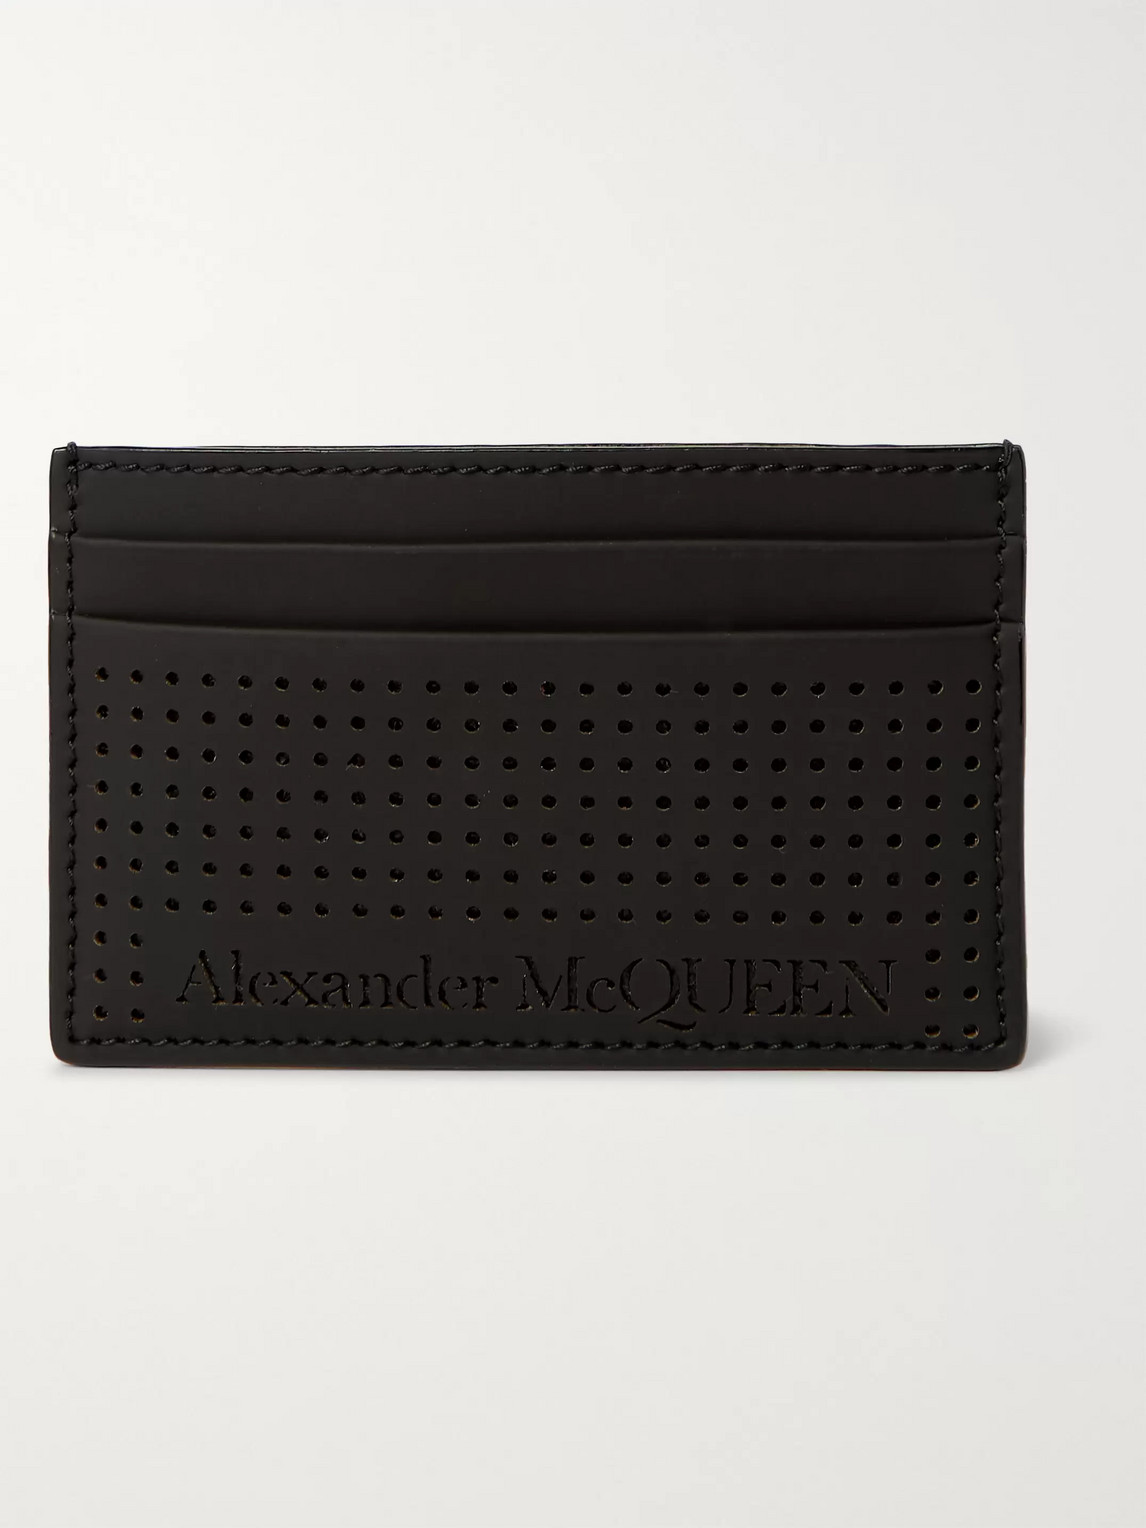 ALEXANDER MCQUEEN PERFORATED LEATHER CARDHOLDER